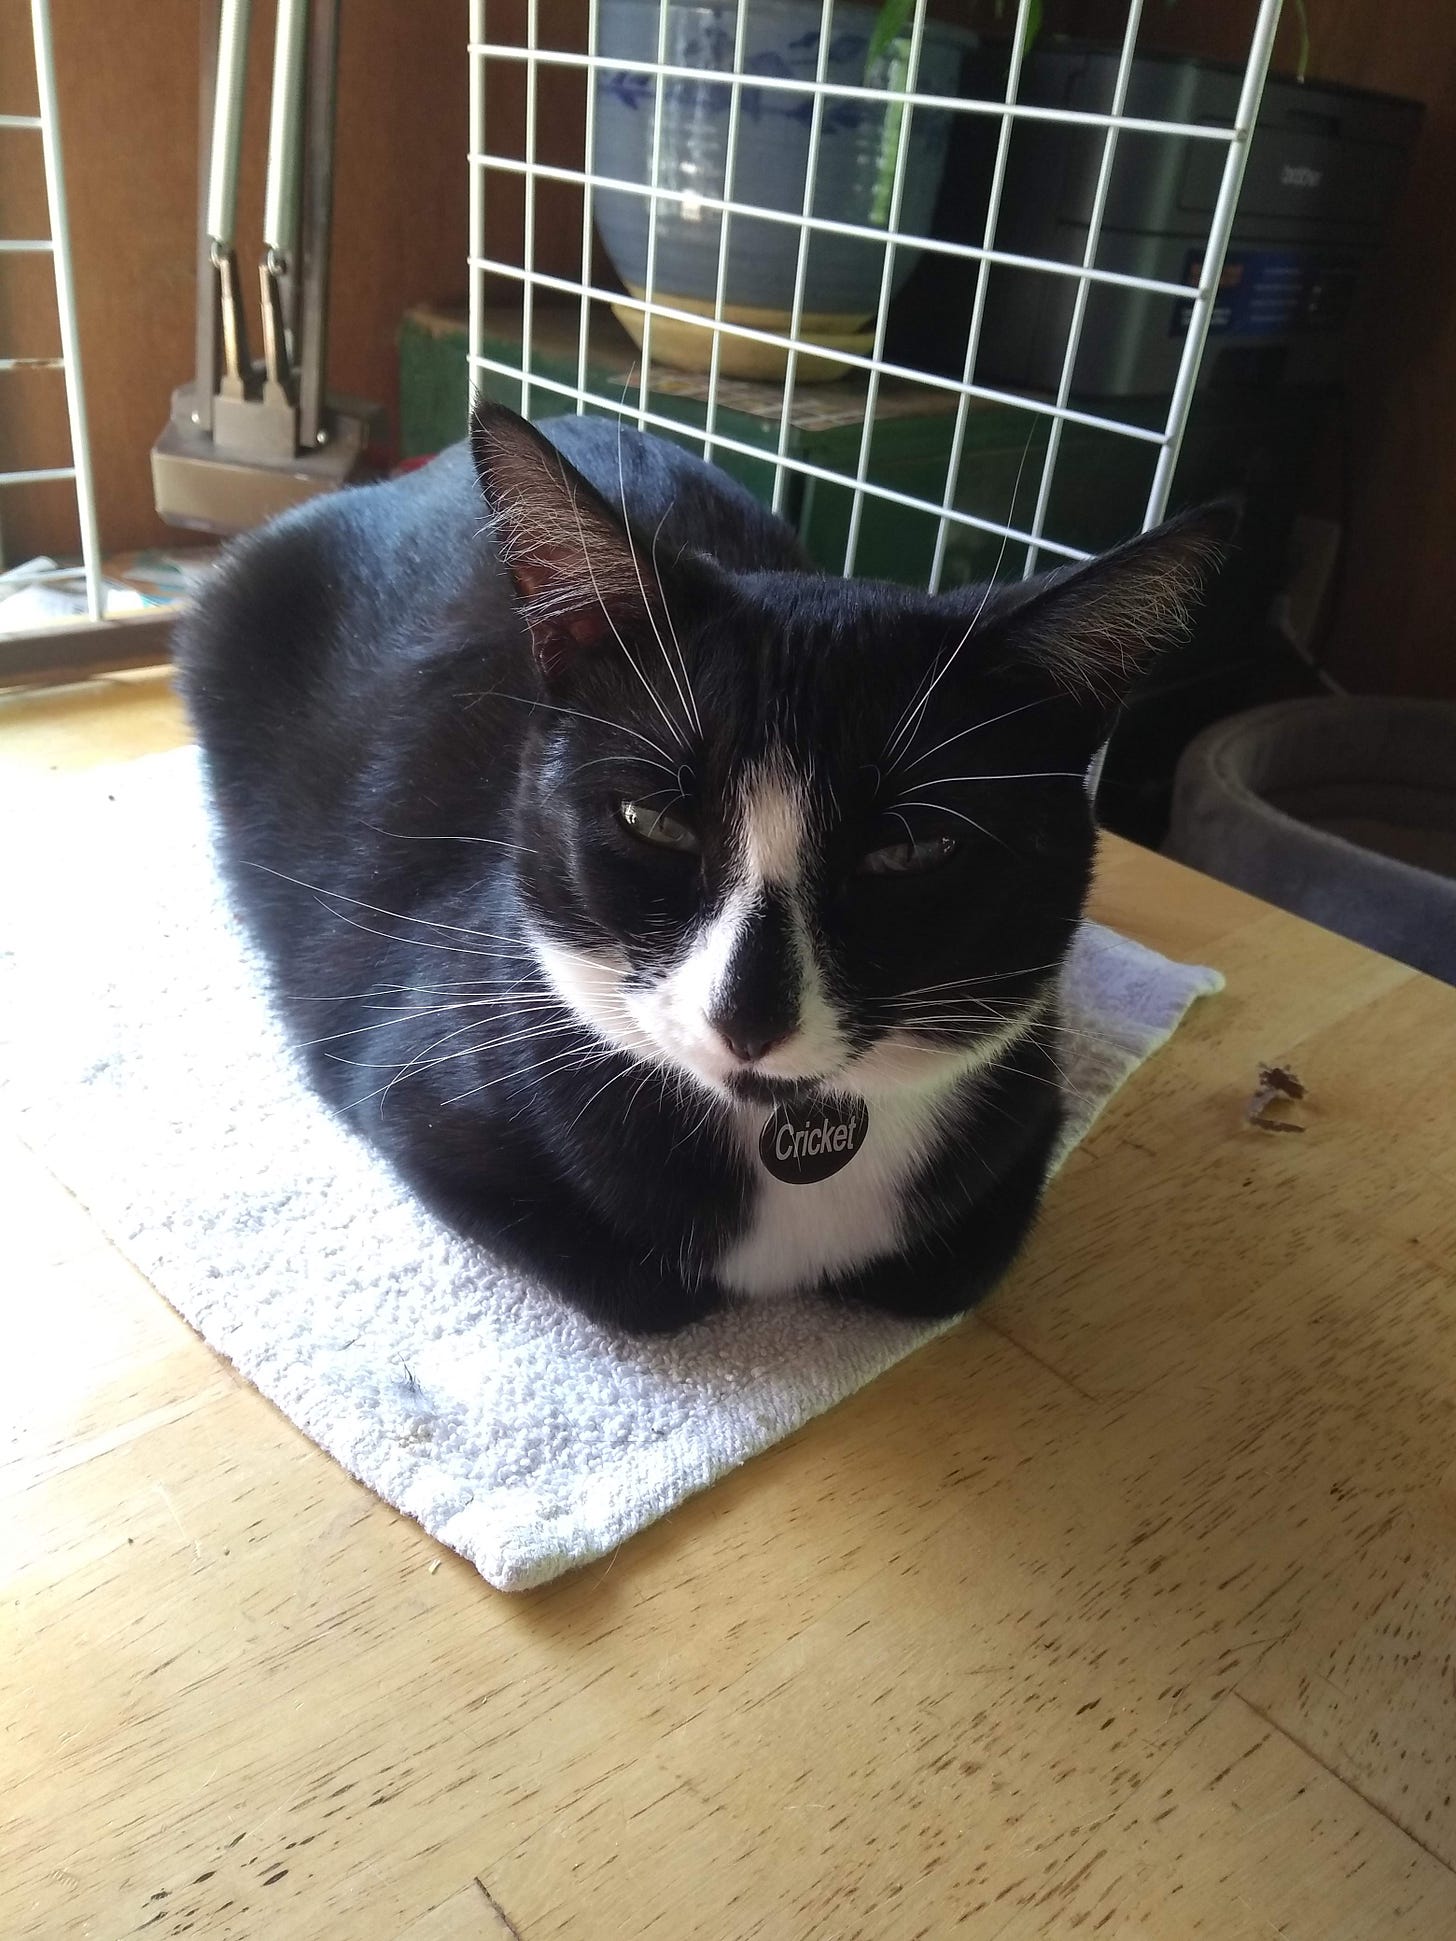 Cricket, my tuxedo cat, loafed on her pad on my craft table.